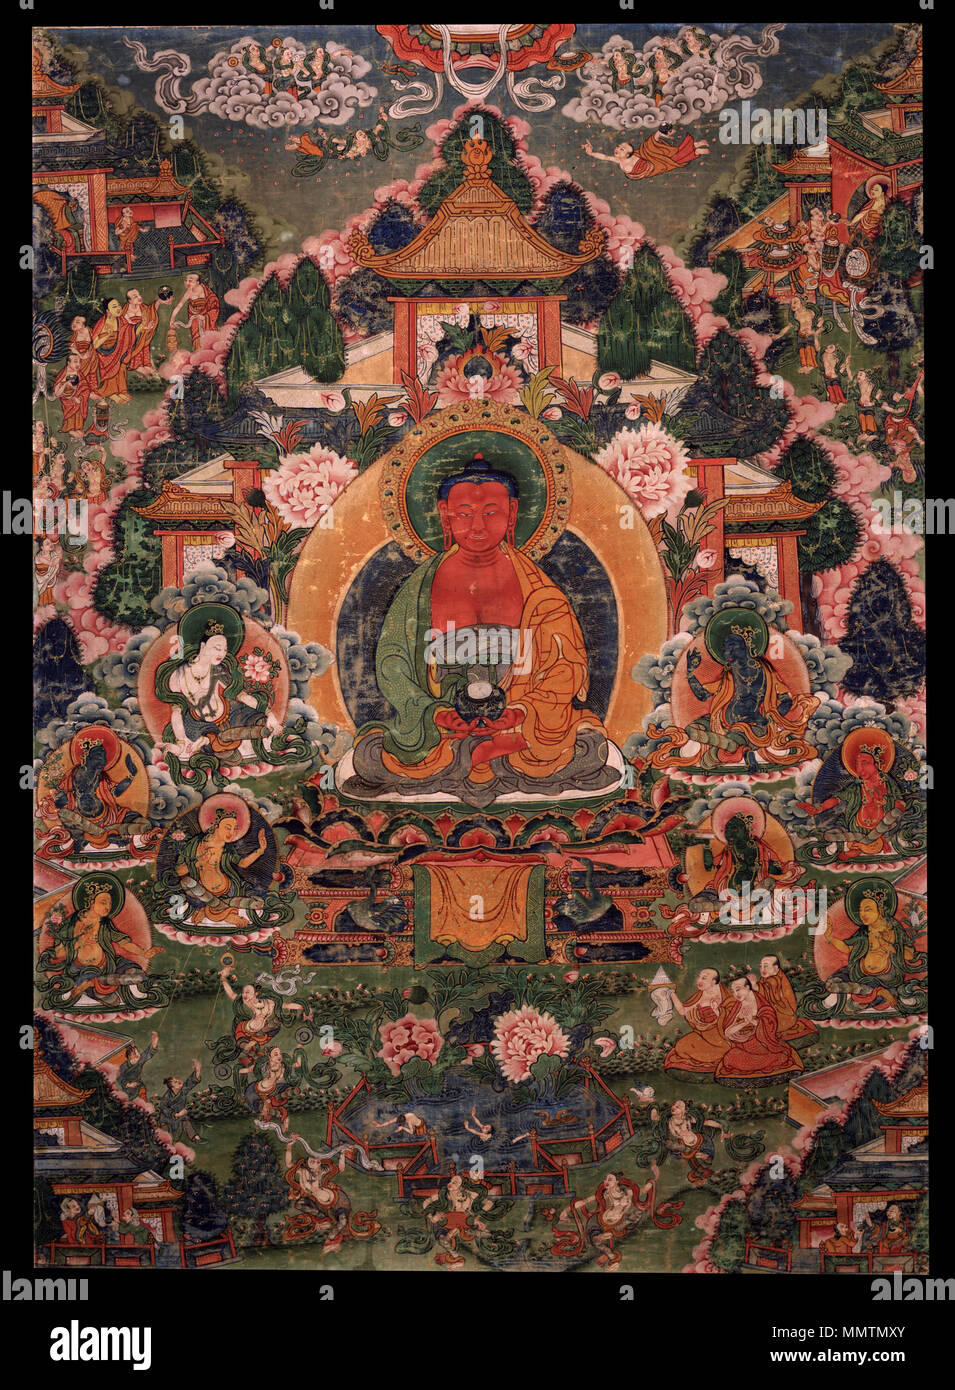 . English: Buddha Amitabha in His Pure Land of Suvakti, Central Tibet. 18th century; Ground mineral pigment on cotton, 73.66x53.34cm (29x21in). Rubin Museum of Art, C2006.66.307HAR701. Amitabha, Buddha residing in the pureland of Sukhavati with the 8 great bodhisattvas seated at the sides.  . 18th century. Unknown Buddha Amitabha in His Pure Land of Suvakti Stock Photo